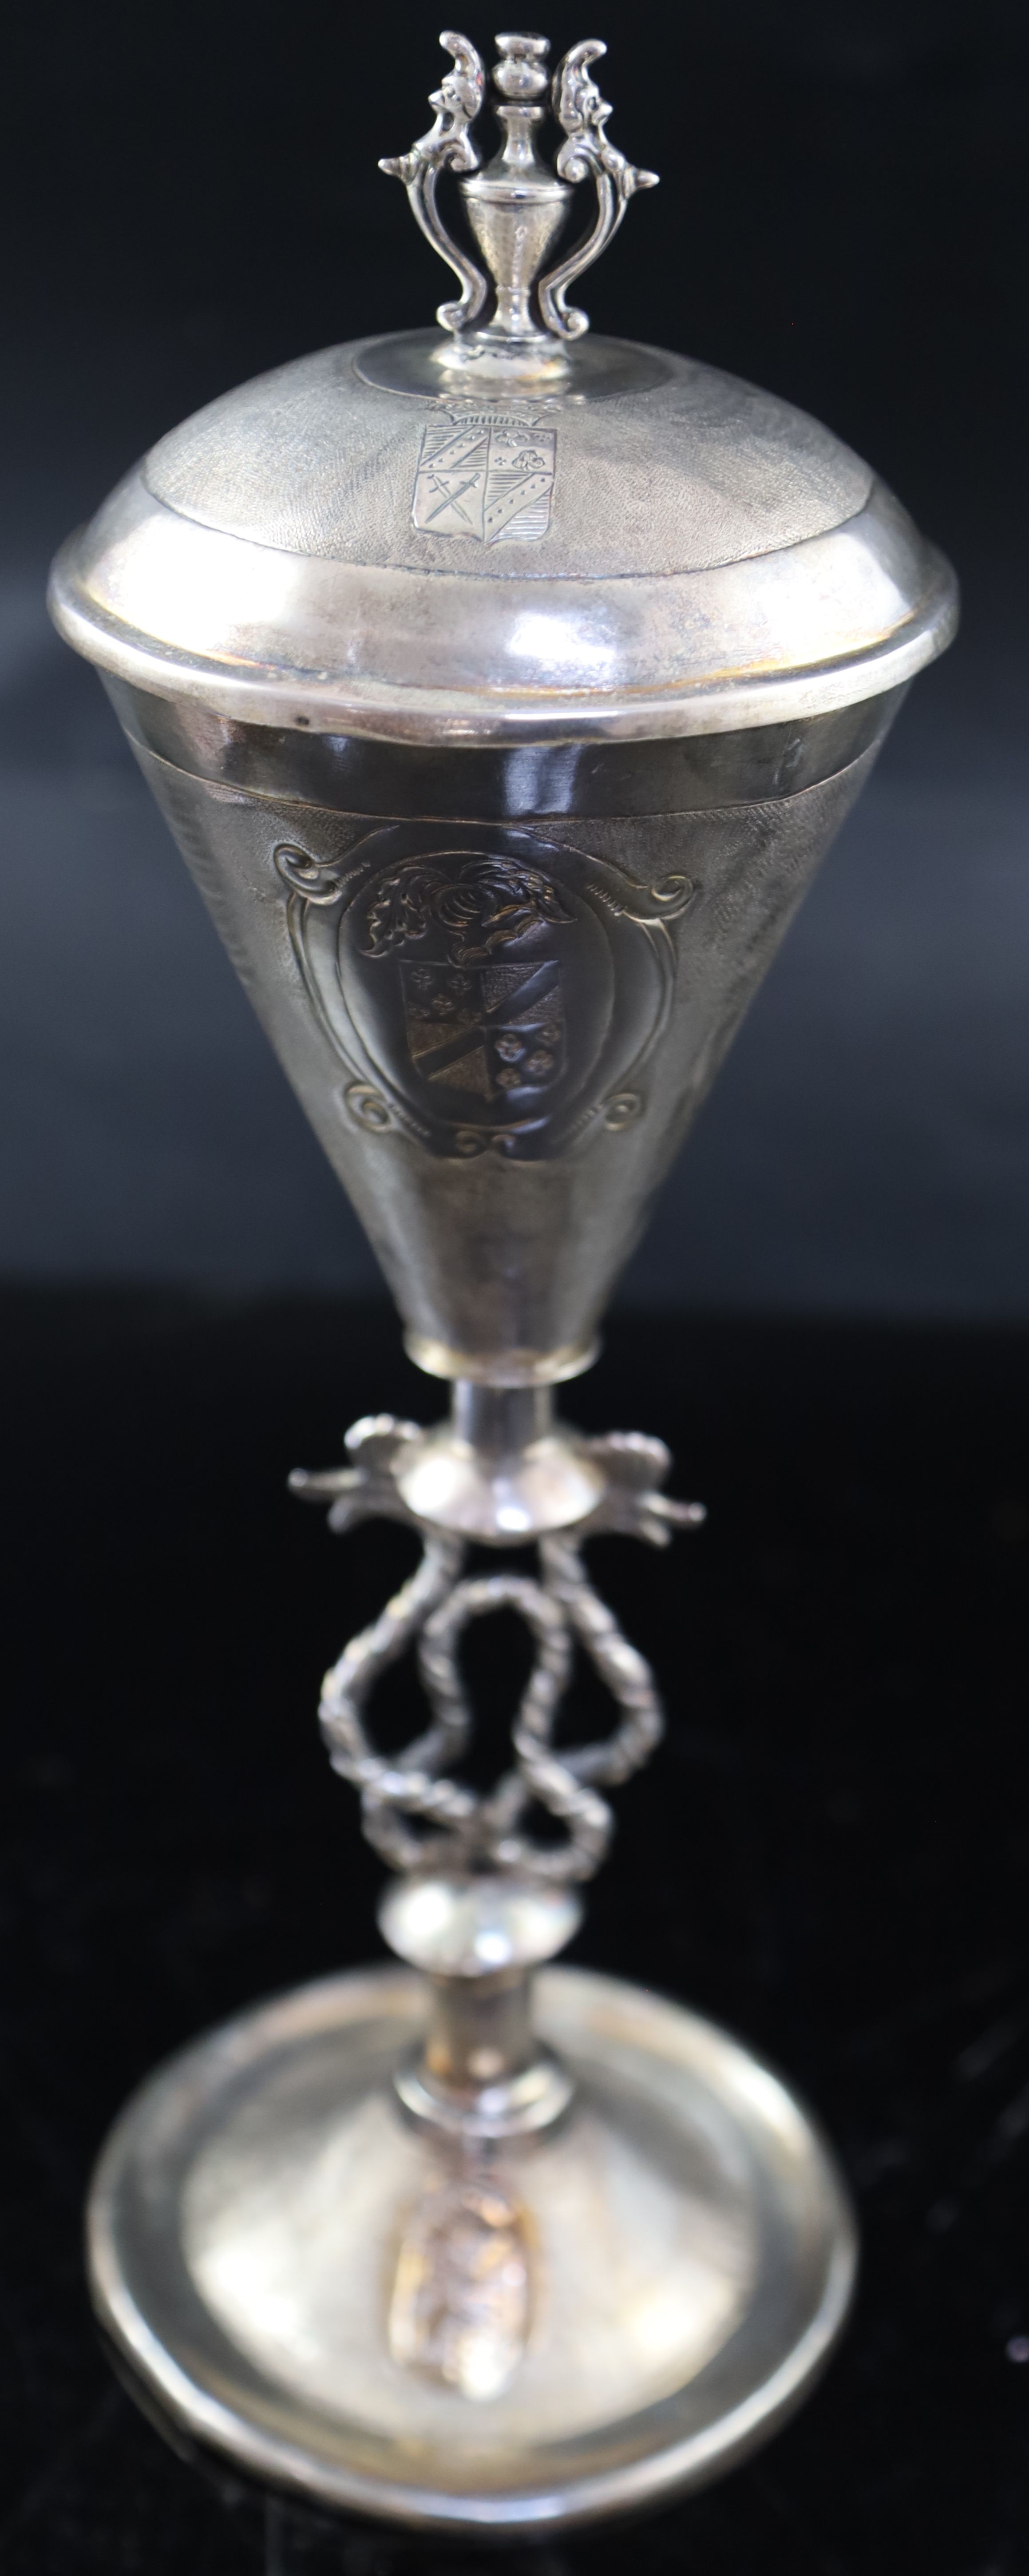 A Continental white metal cup and cover, 35.5cm, 14.5 oz, a 19th century two handled Old Sheffield - Image 16 of 17